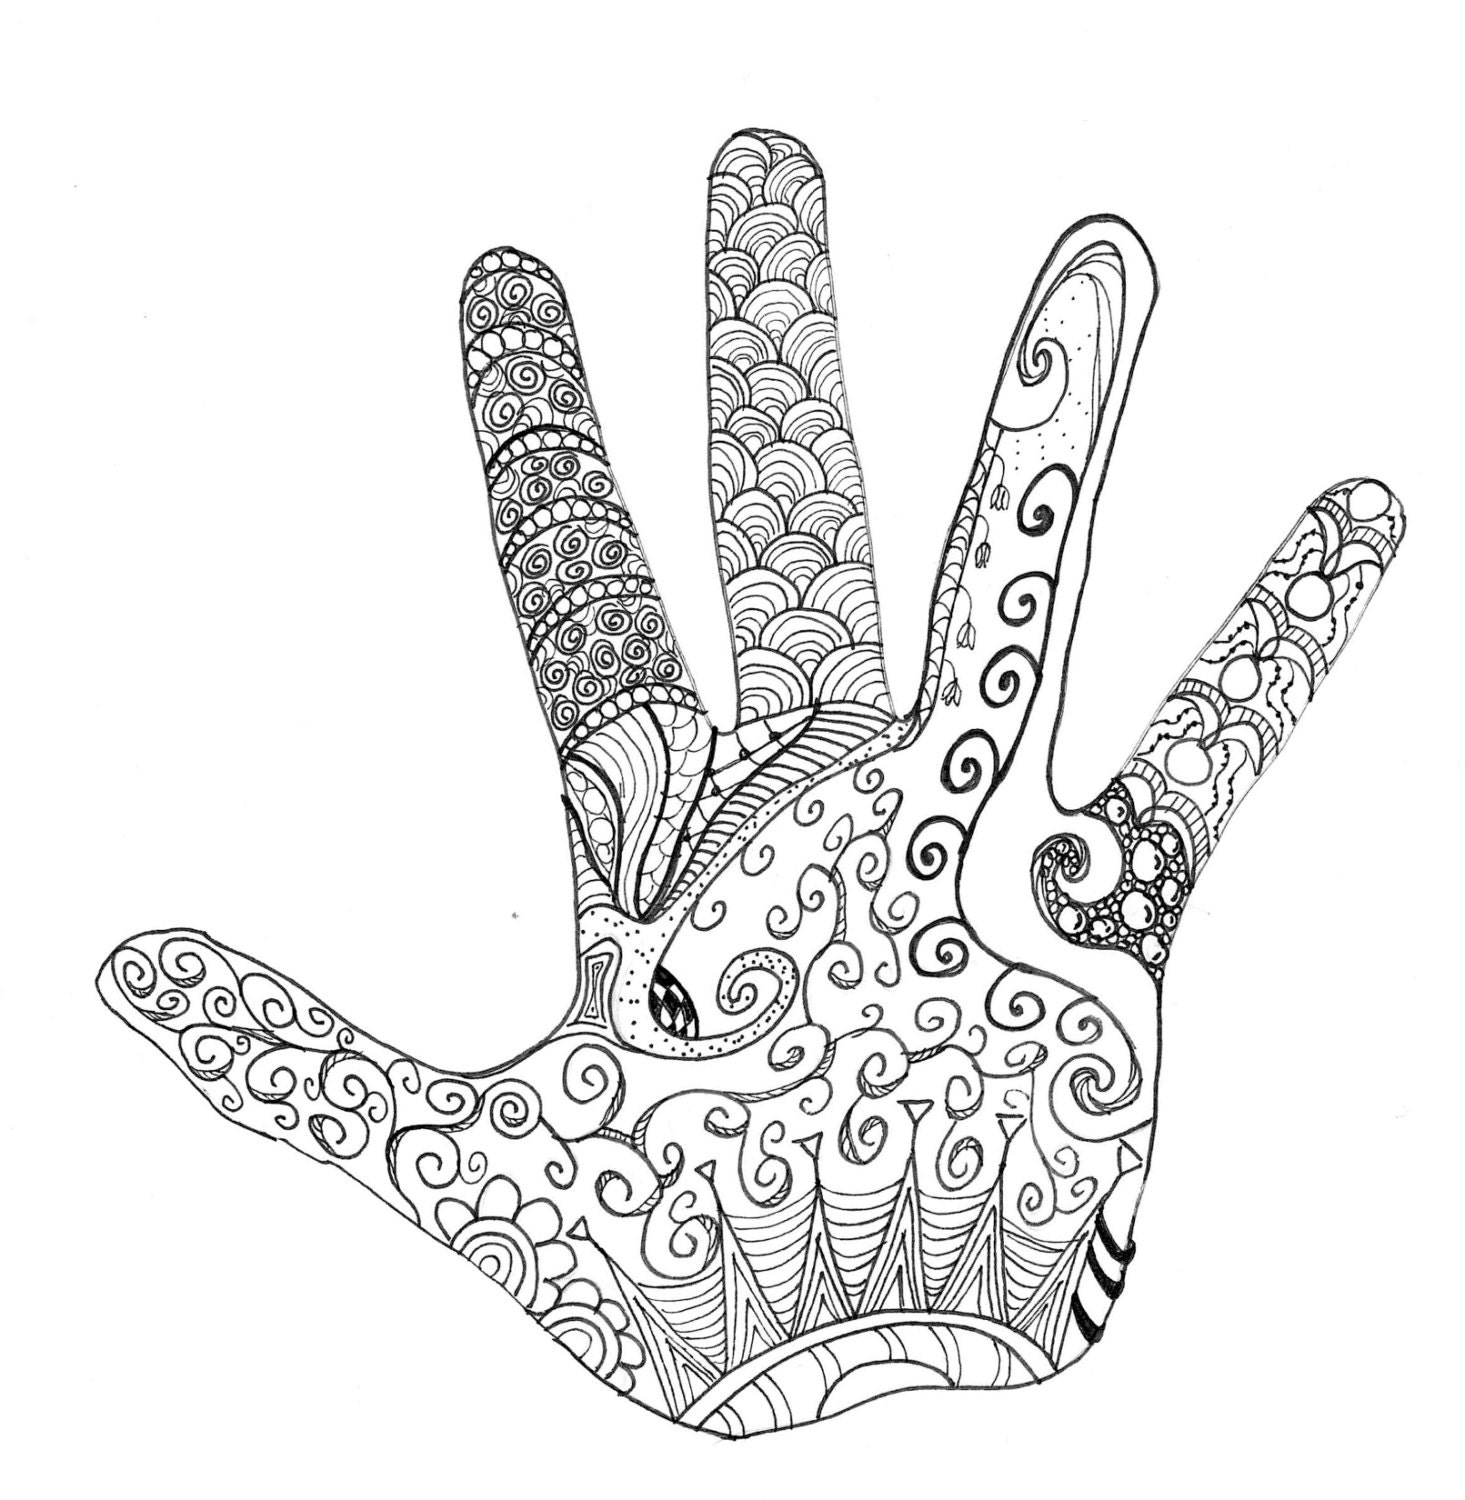 Download Zentangle Hand Adult Coloring Page